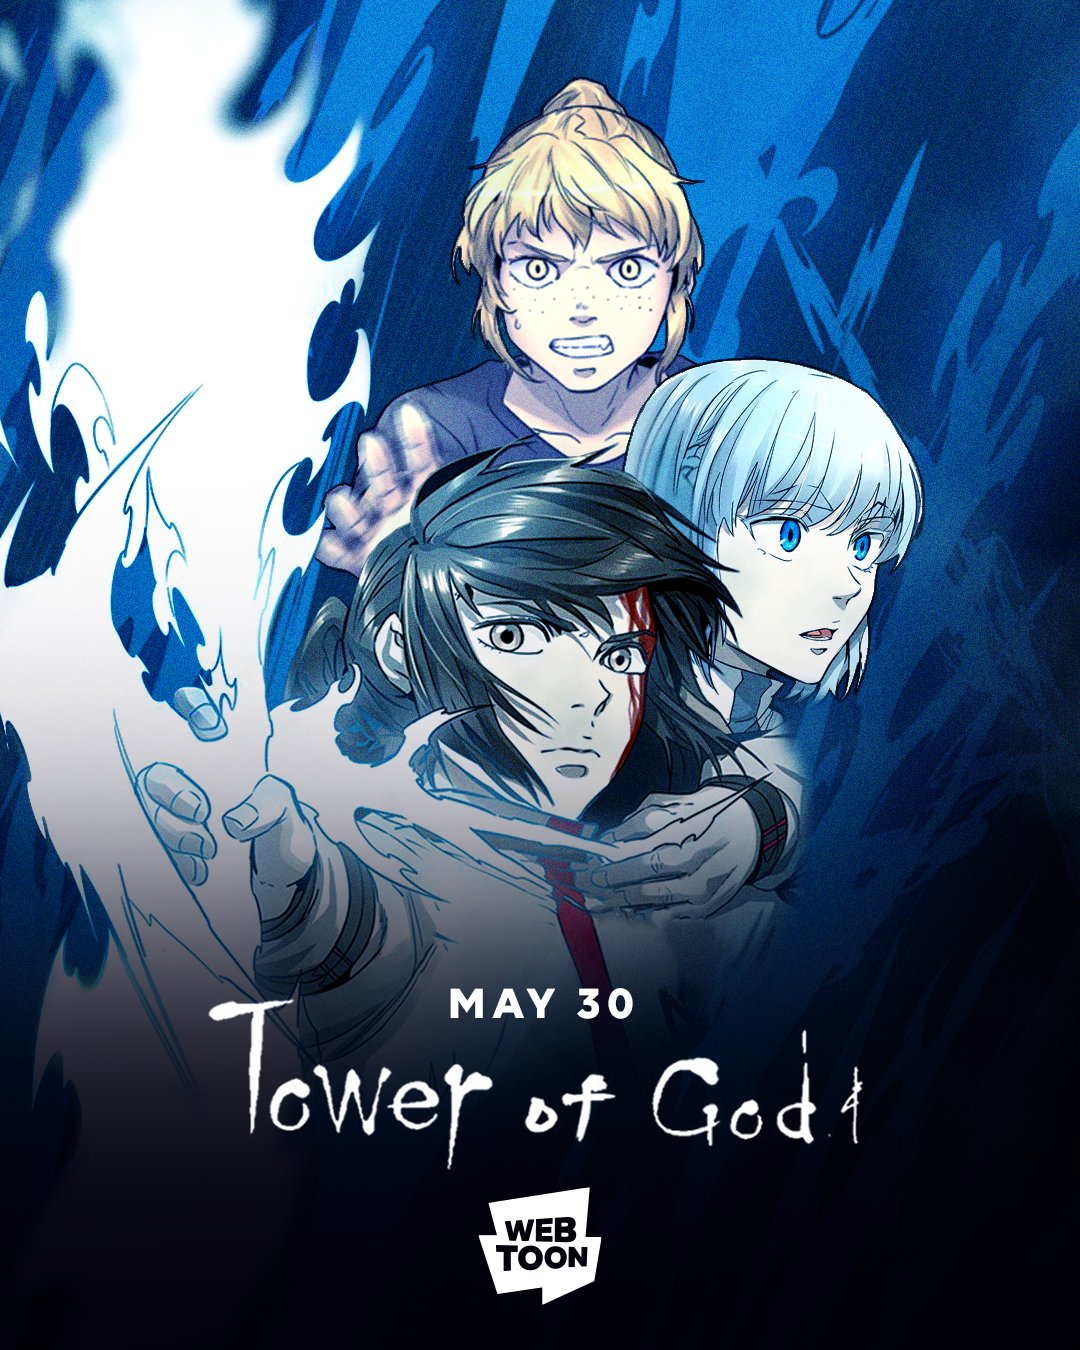 Tower of God returns in English